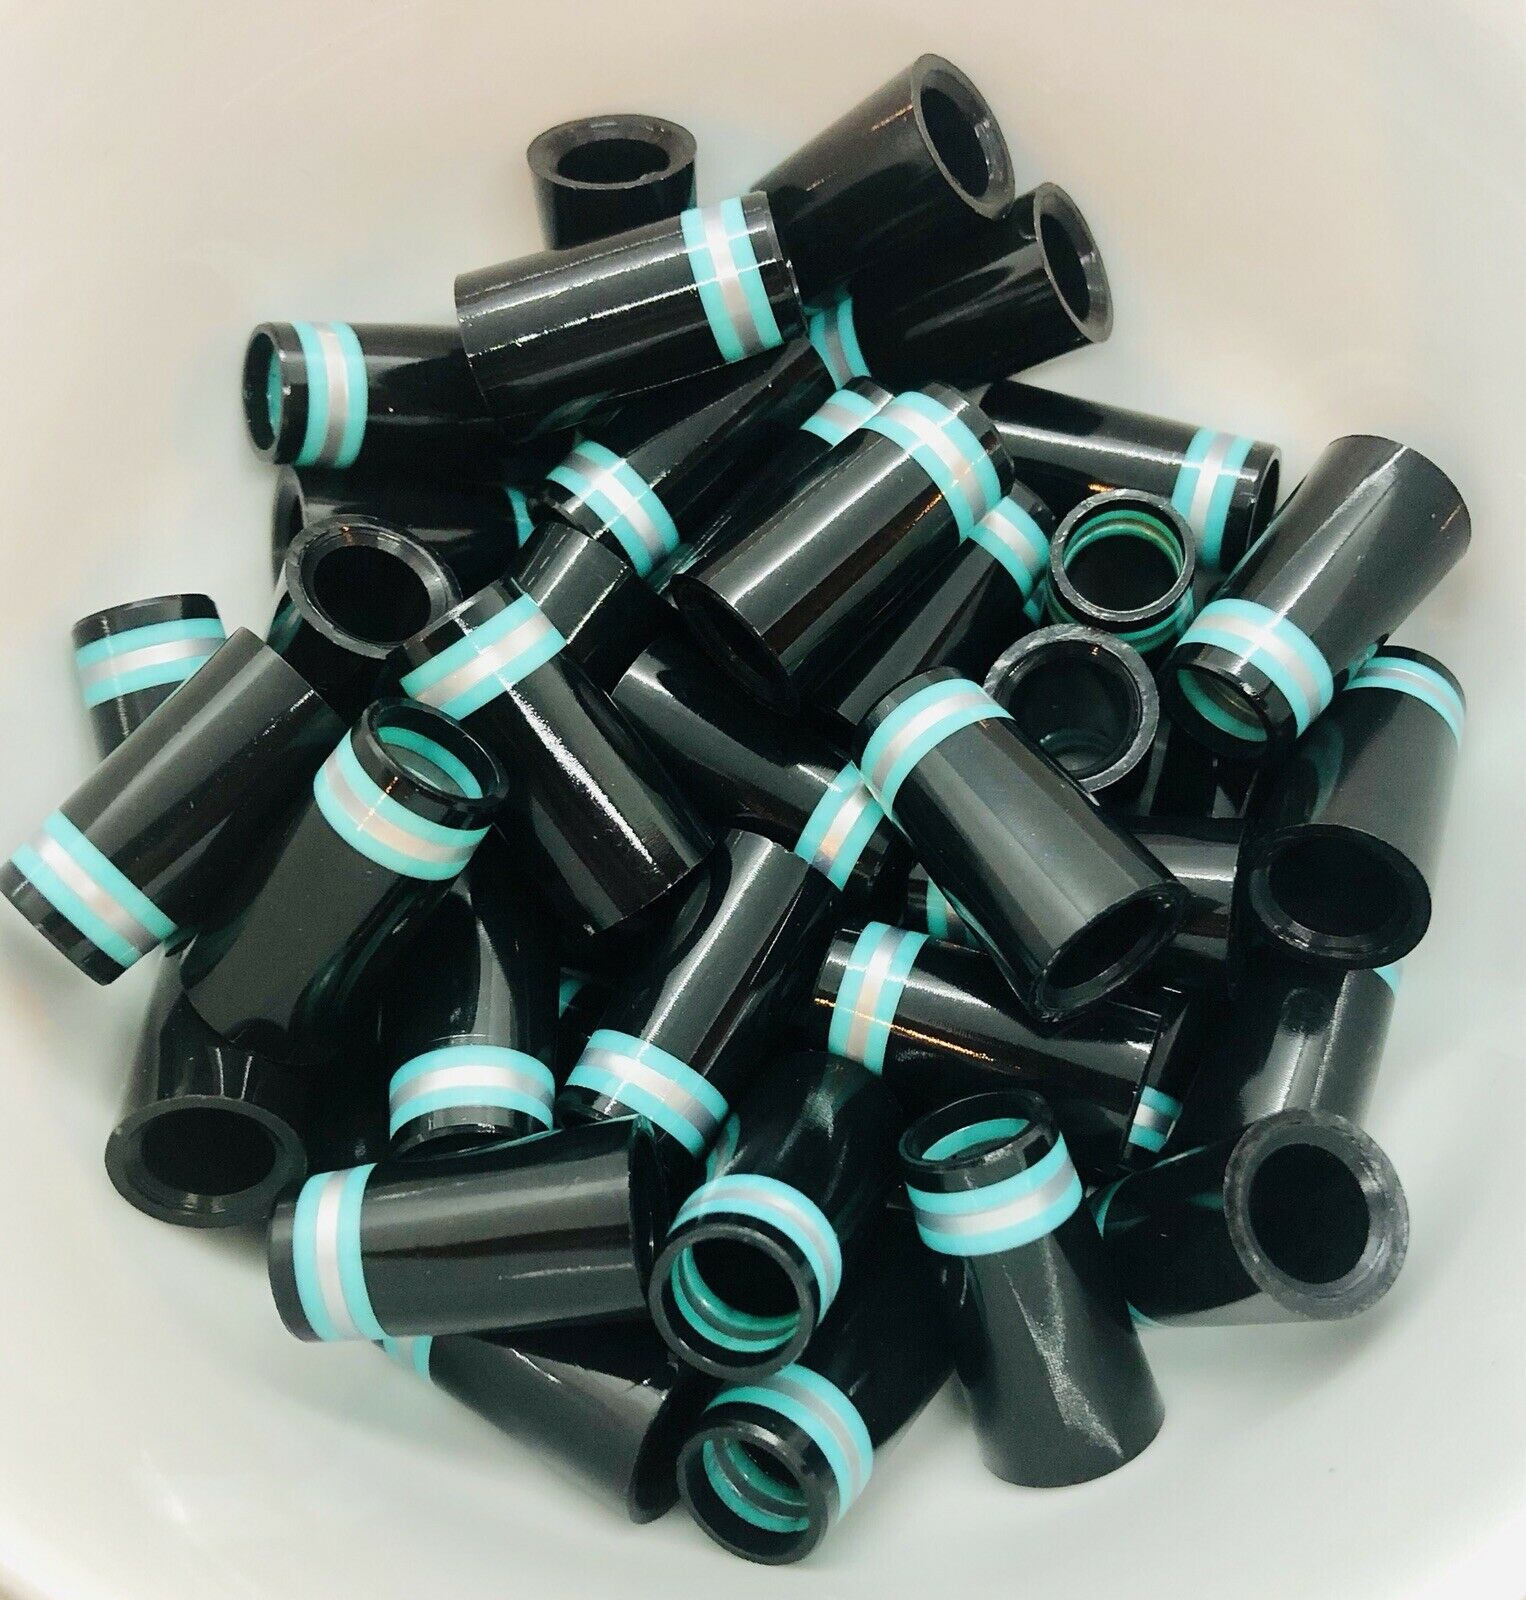 Premium Quality Iron Ferrules (Black w/ Silver & Turquoise Rings) 1” - The Golf Club Trader